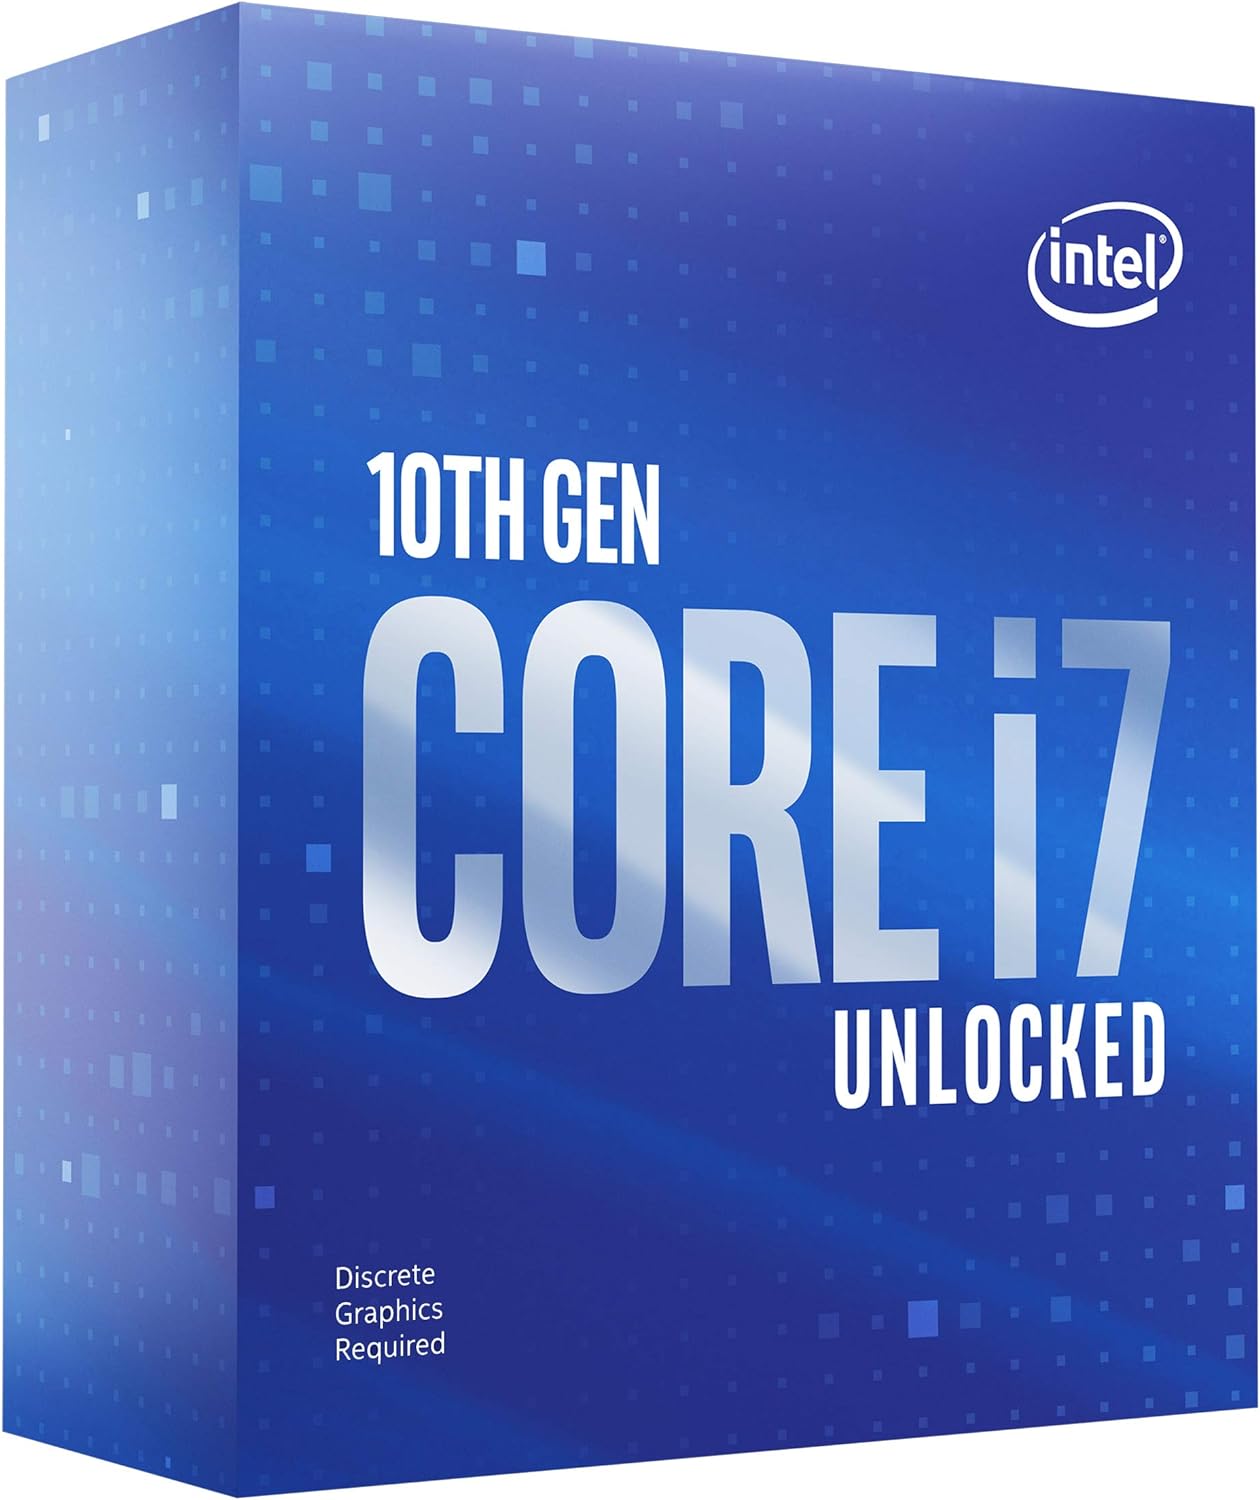 Intel Core i7-10700KF Desktop Processor 8 Cores up to 5.1 GHz Unlocked Without Processor Graphics LGA1200 (Intel 400 Series chipset) 125W